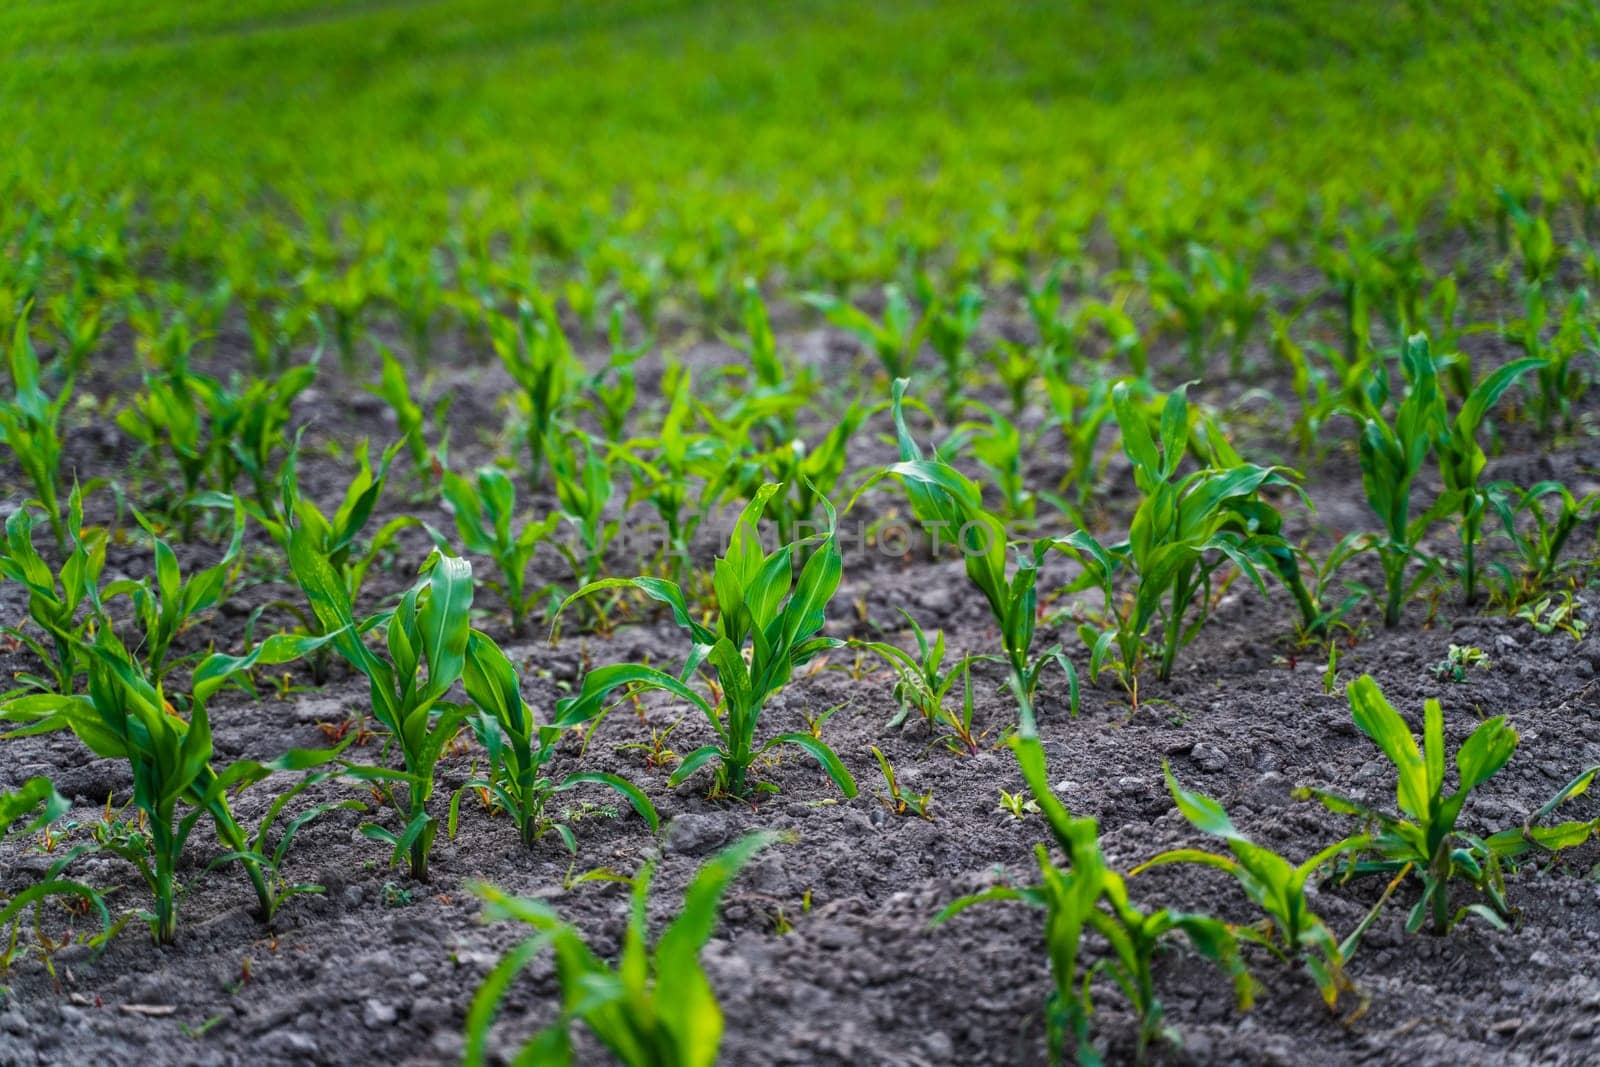 Rows of fresh green corn sprouts in spring on the field. Growing young green corn seedling sprouts in cultivated agricultural farm field